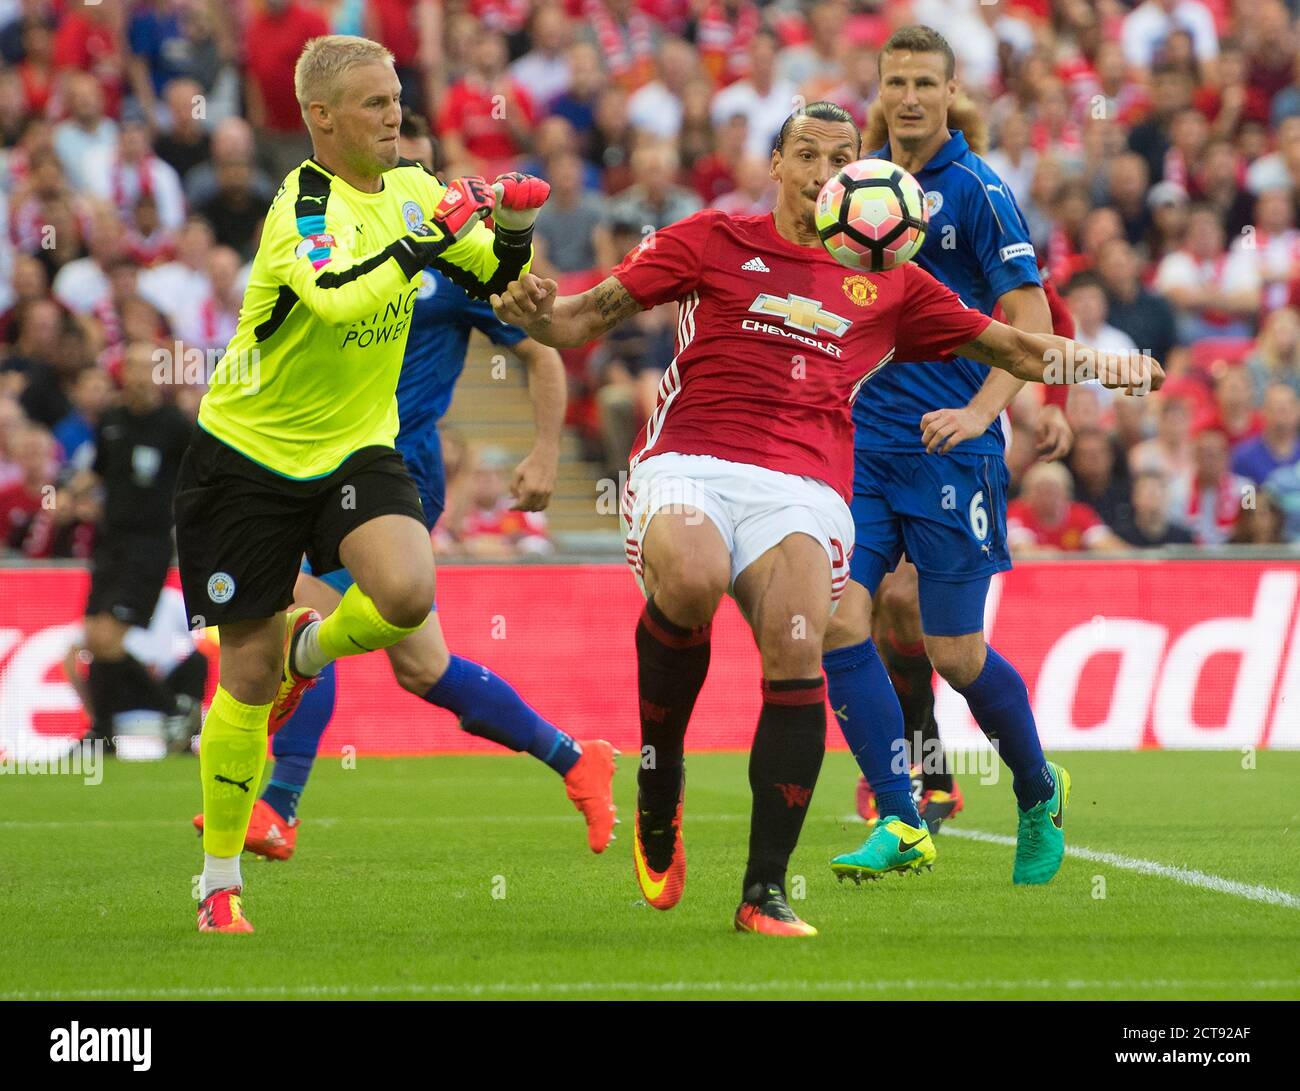 ZLATAN IBRAHIMOVIC CHALLENGES FOR HE BALL AS KASPER SCHMEICHEL CHARGES OUT TO CLEAR  LEICESTER CITY v MANCHESTER UTD THE FA COMMUNITY SHIELD - WEMBLEY Stock Photo